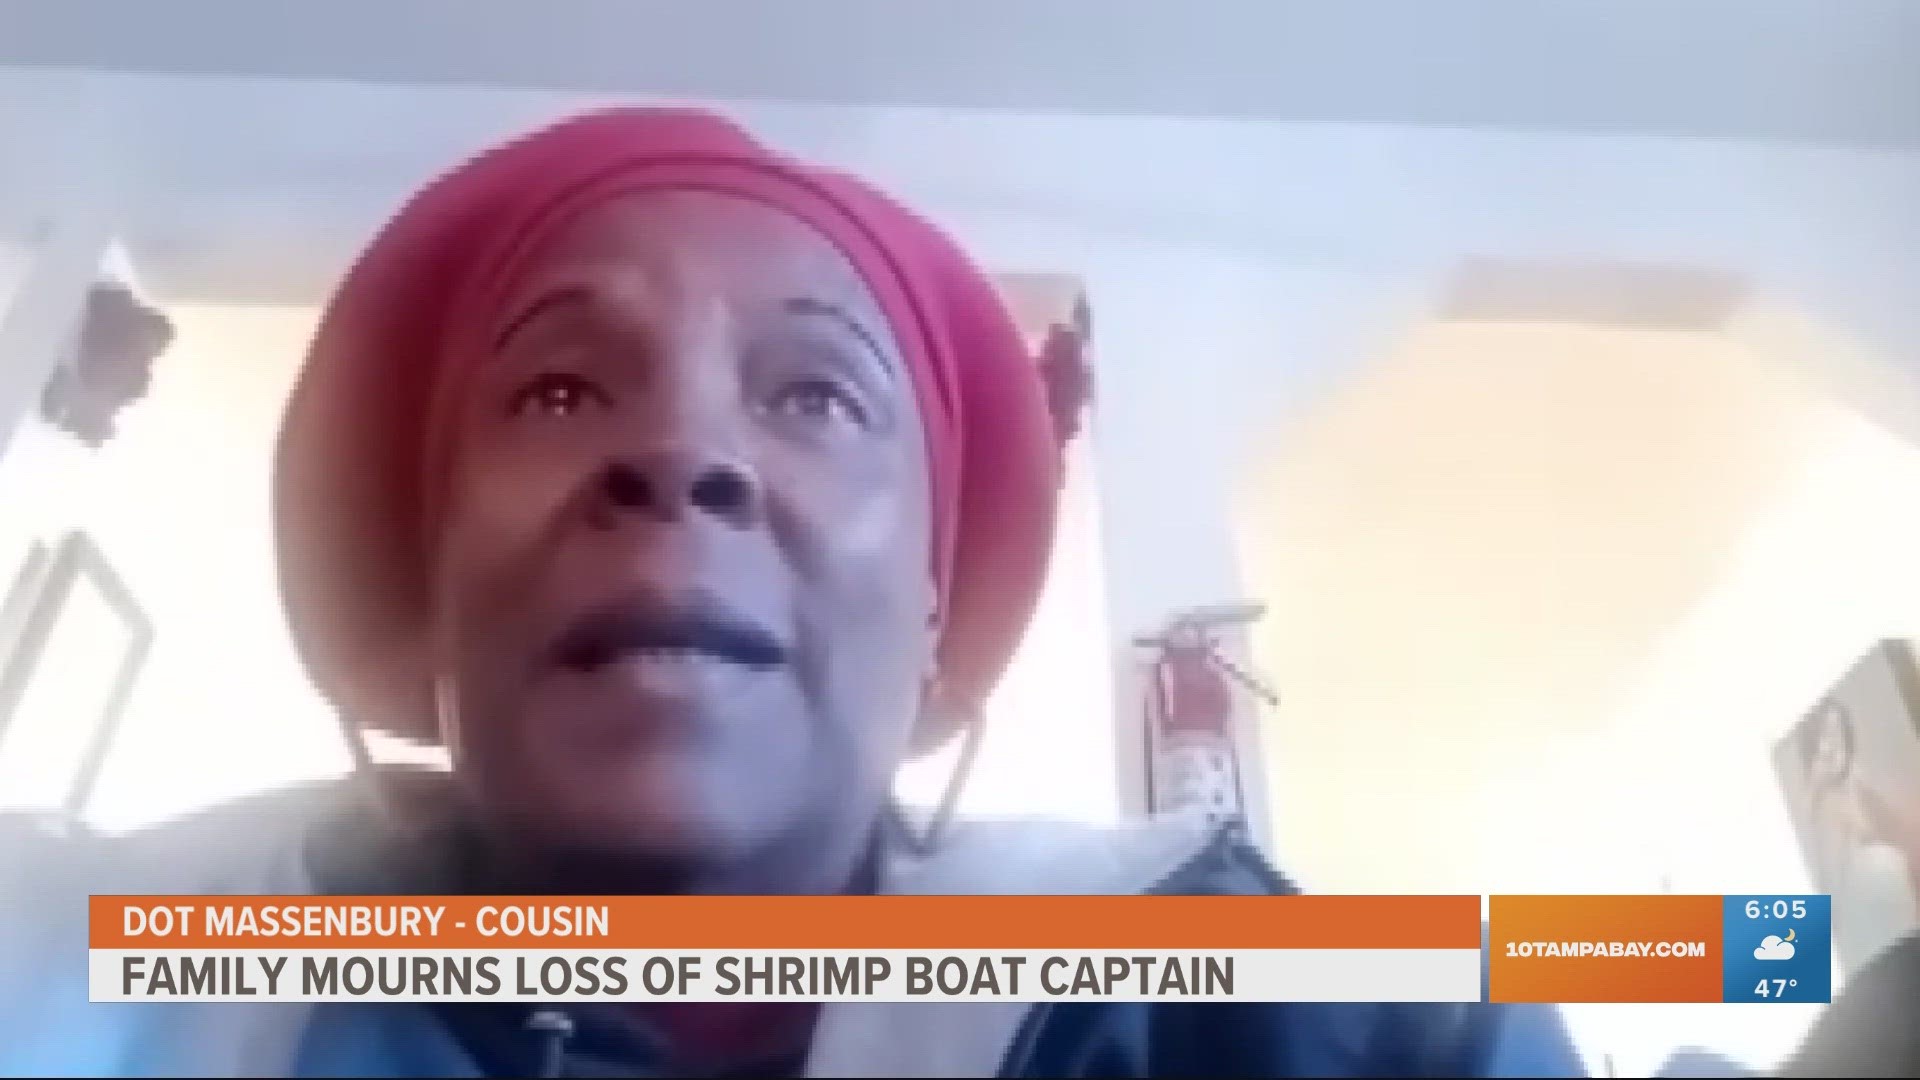 A shrimp boat captain died when the boat he lived in sank. Investigators are trying to determine the cause. Meanwhile, his family remembers him.